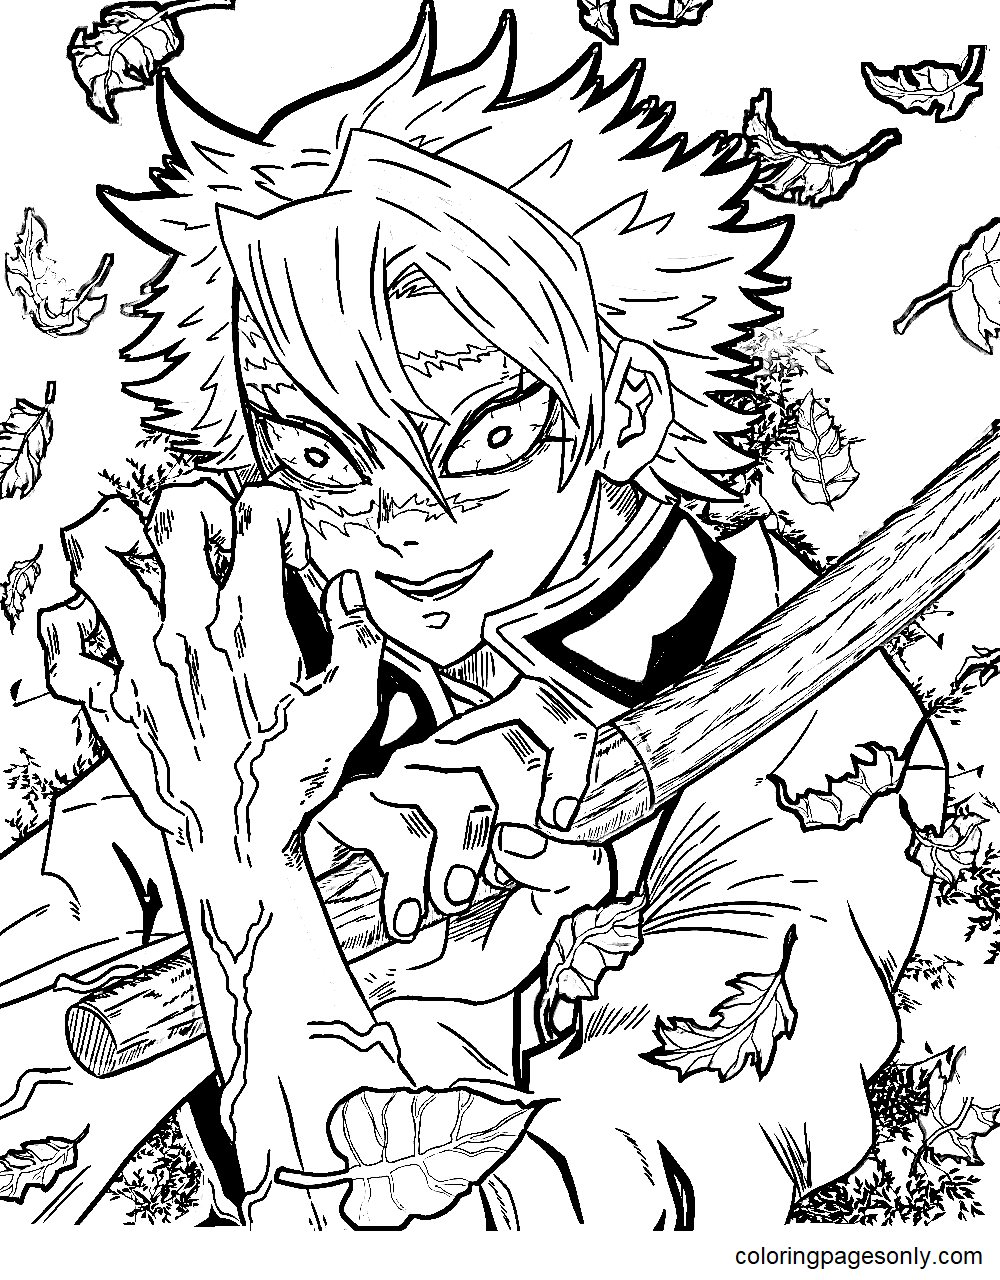 Sanemi in Demon Slayer Coloring Page